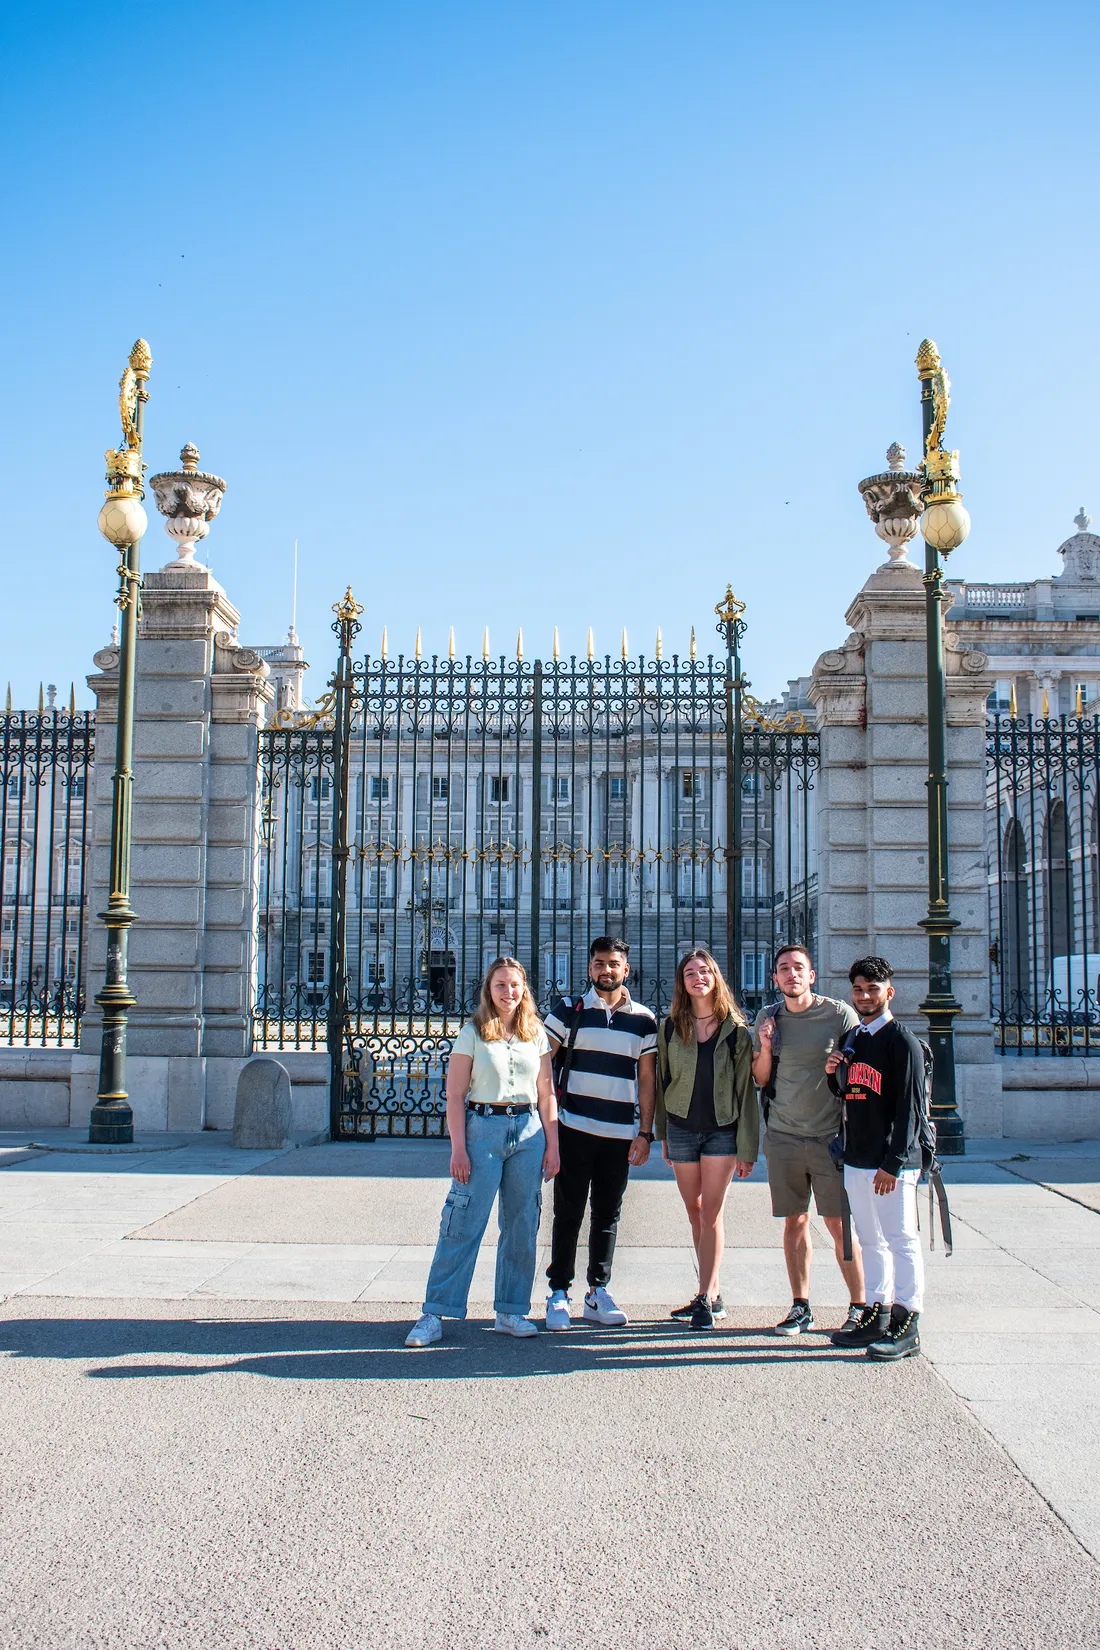 People studying abroad in Madrid.